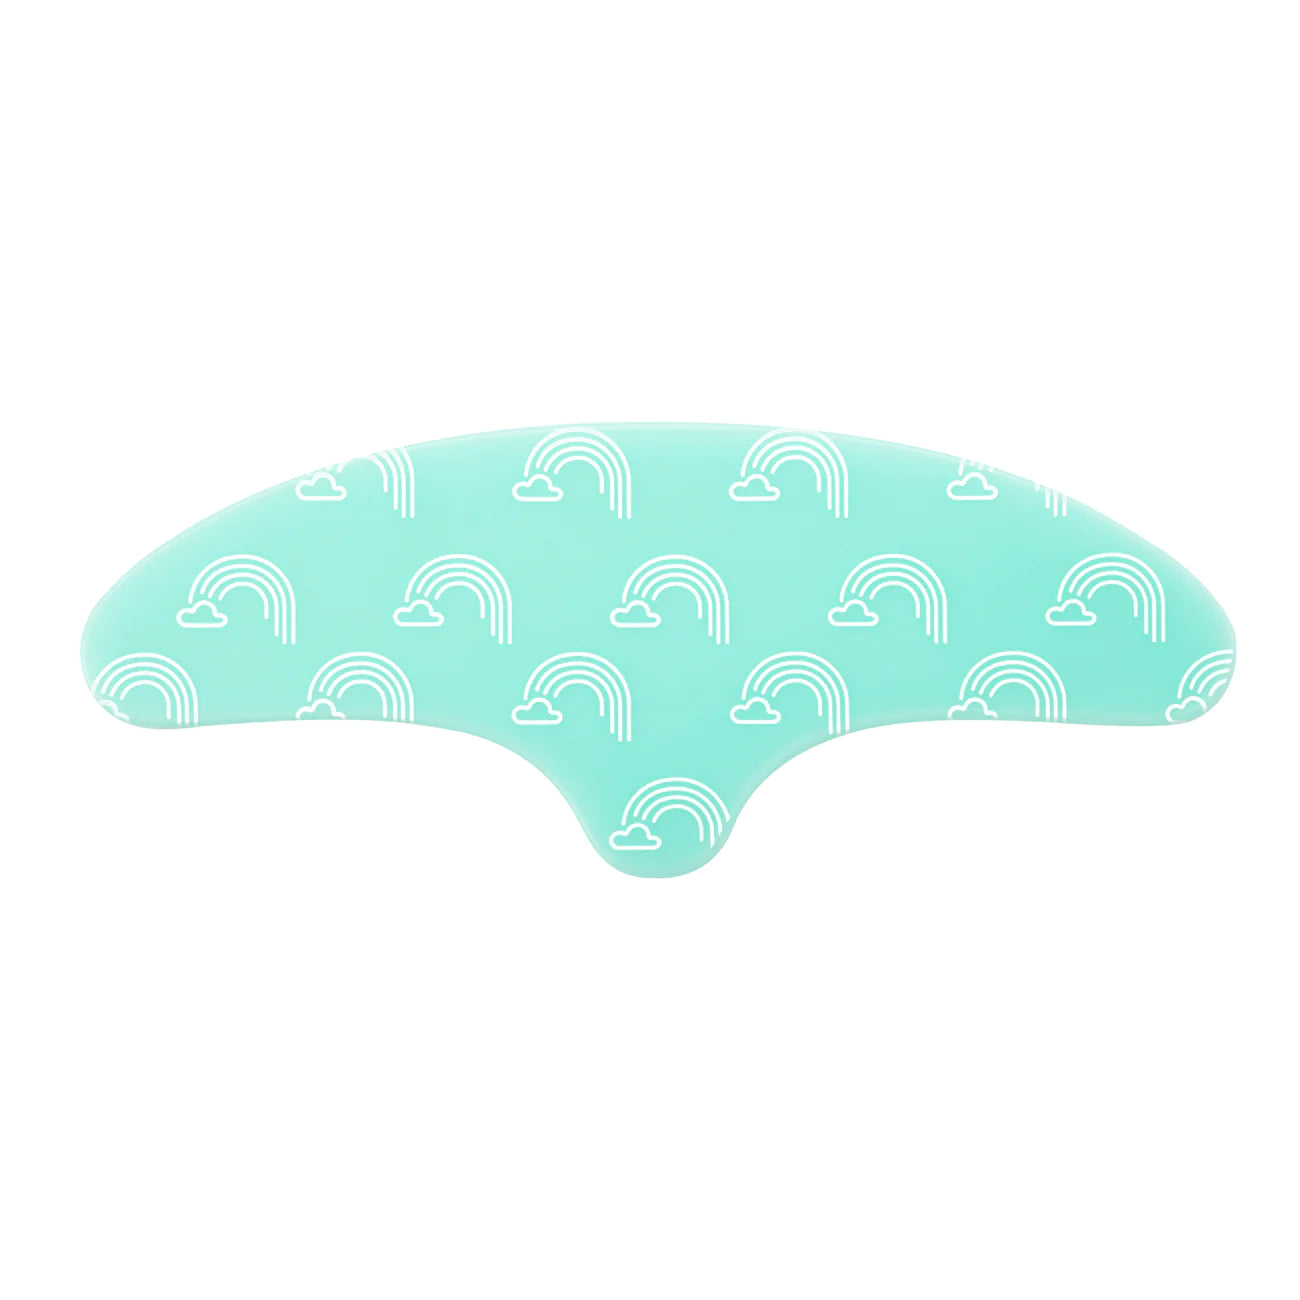 Pacifica Reusable Masks - Forehead Brow